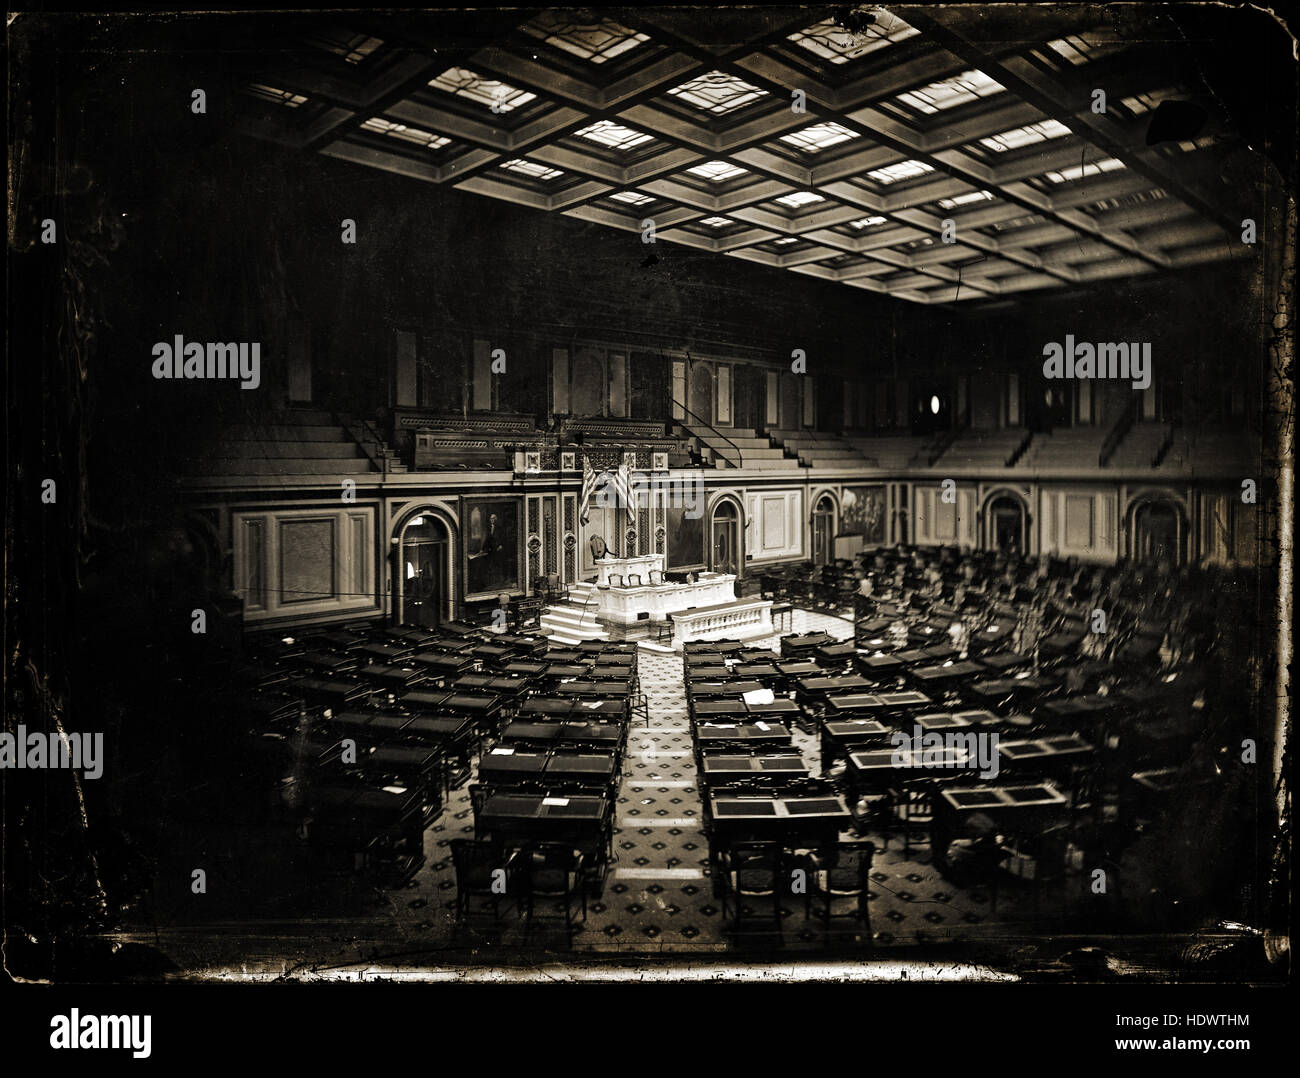 Old US House of Representatives Chamber. Circa 1861. This is the earliest known photo of the interior of the US capitol. Photograph from the Brady-Handy Photograph Collection    This archival print is available in the following sizes:    8' x 10'   $15.95 w/ FREE SHIPPING  11' x 14' $23.95 w/ FREE SHIPPING  16' x 20' $59.95 w/ FREE SHIPPING  20' x 24' $99.95 w/ FREE SHIPPING    * The American Photoarchive watermark will not appear on your print. Stock Photo